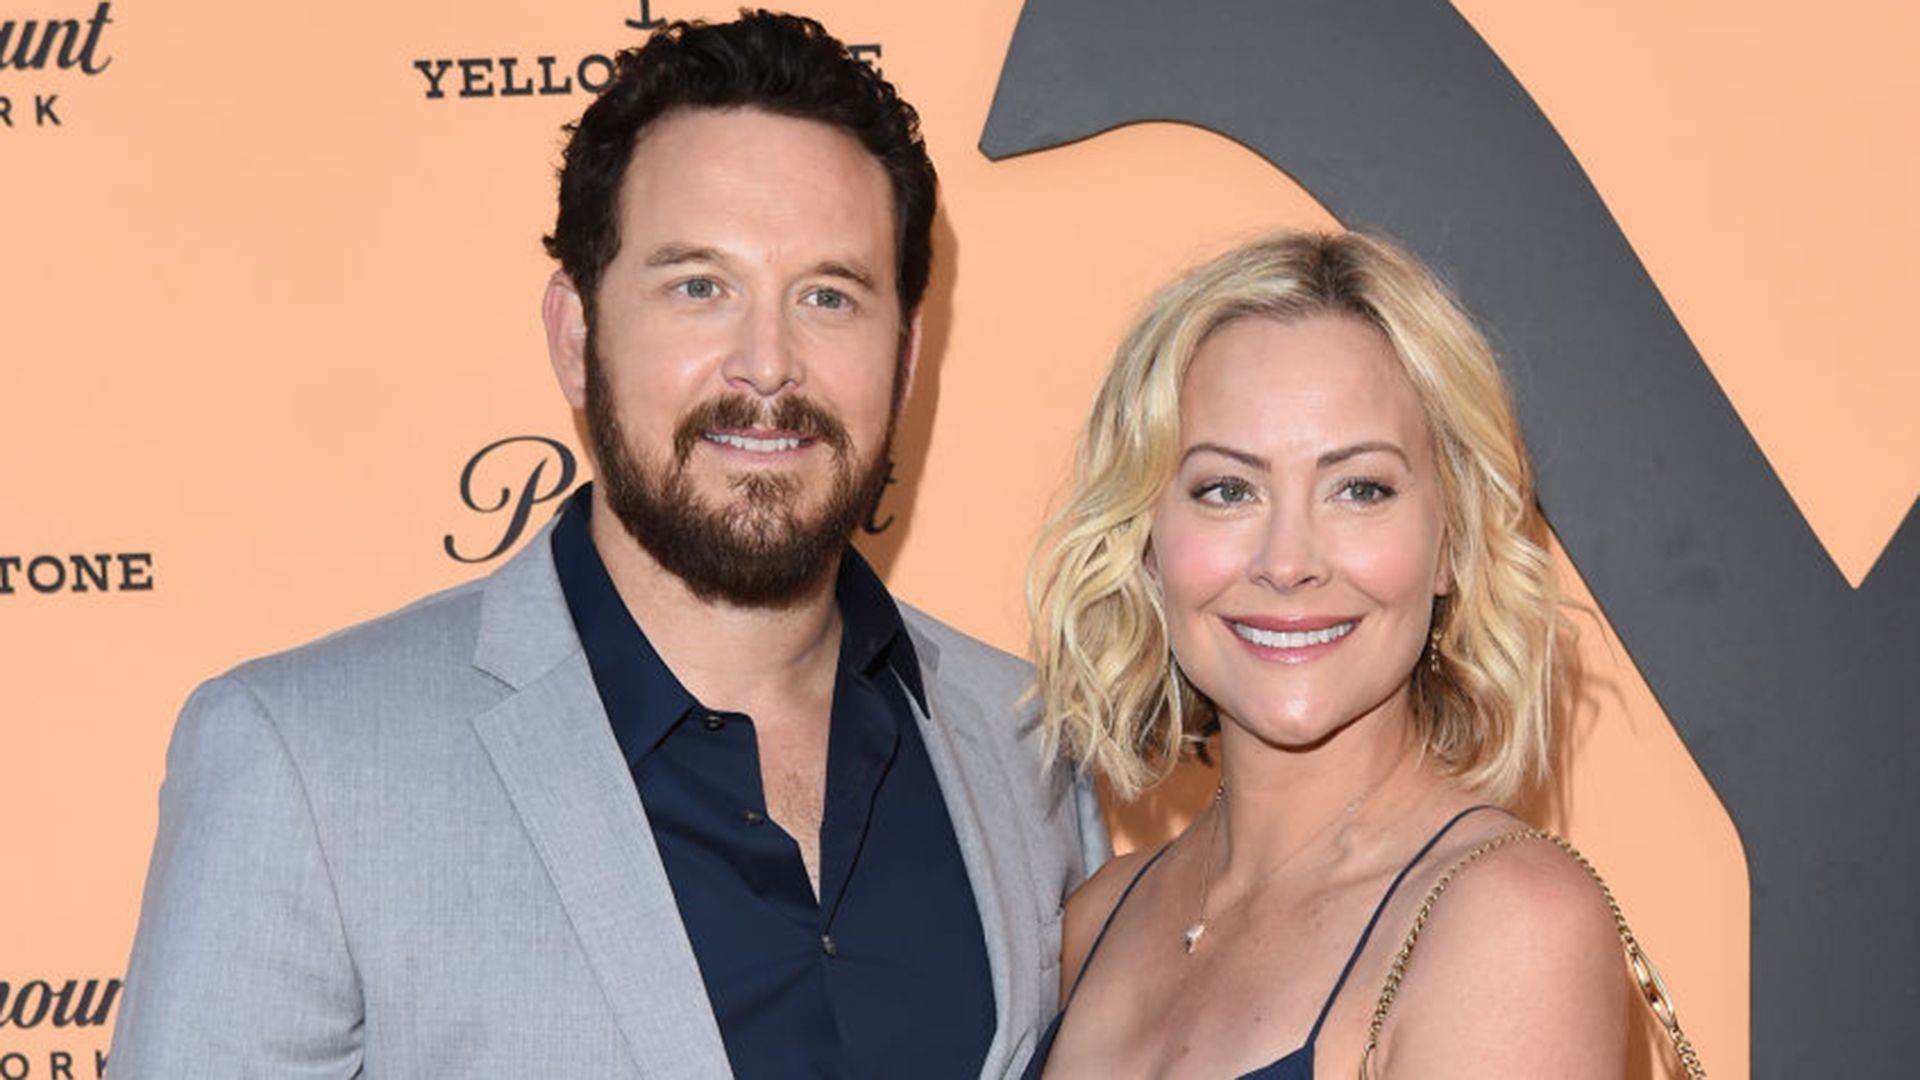 Cole Hauser and Cynthia Daniel attend the premiere party for Paramount Network's "Yellowstone" Season 2